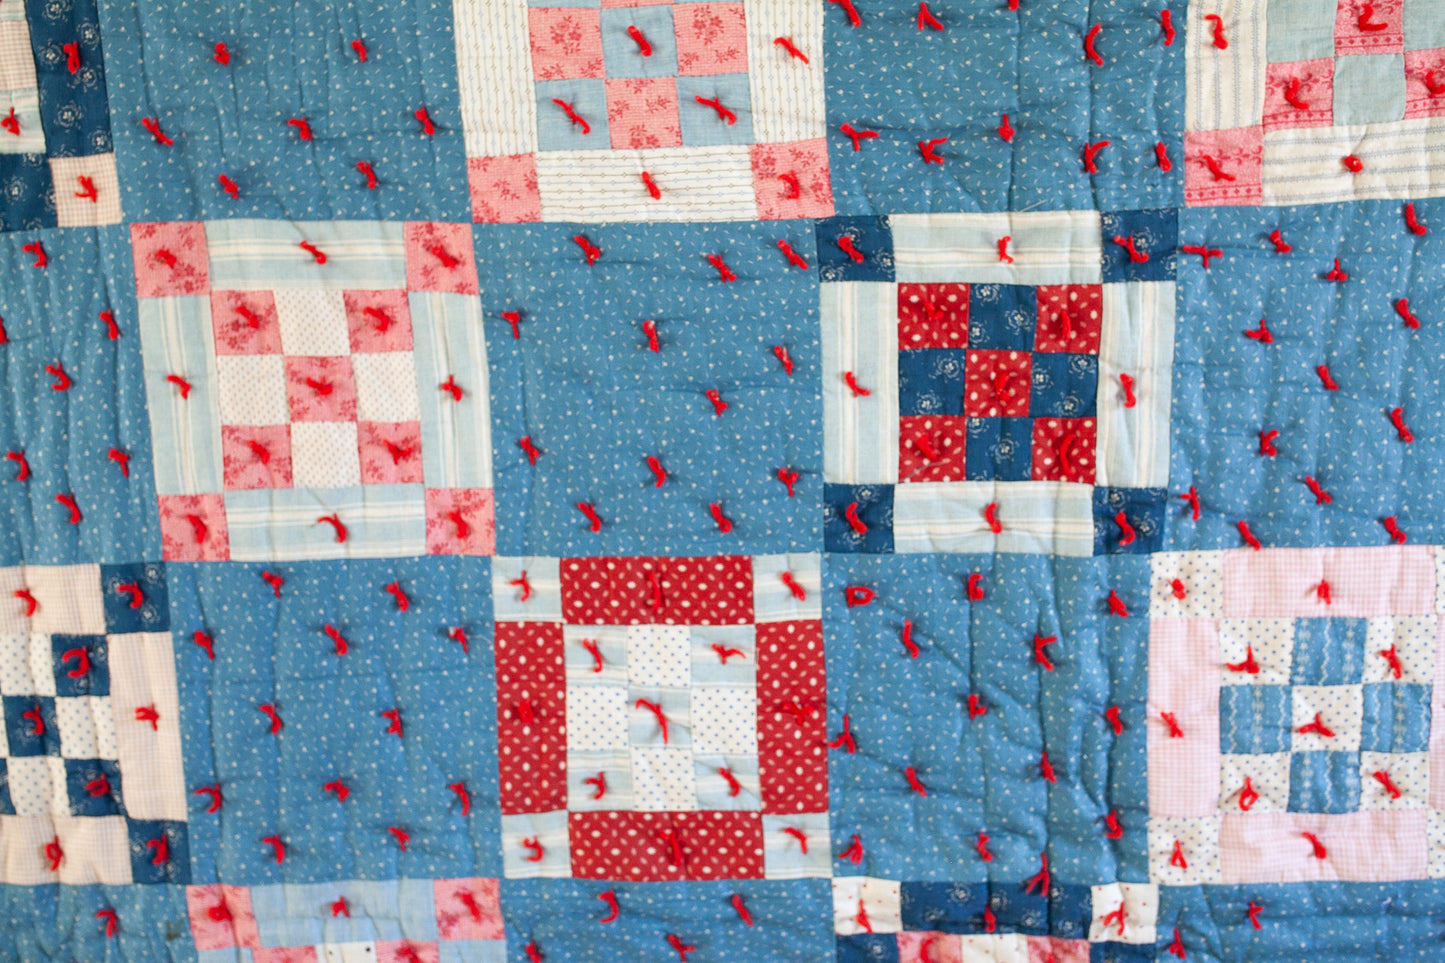 Vintage Quilt -  Red White and Blue Quilt - Tie Quilt -9 patch